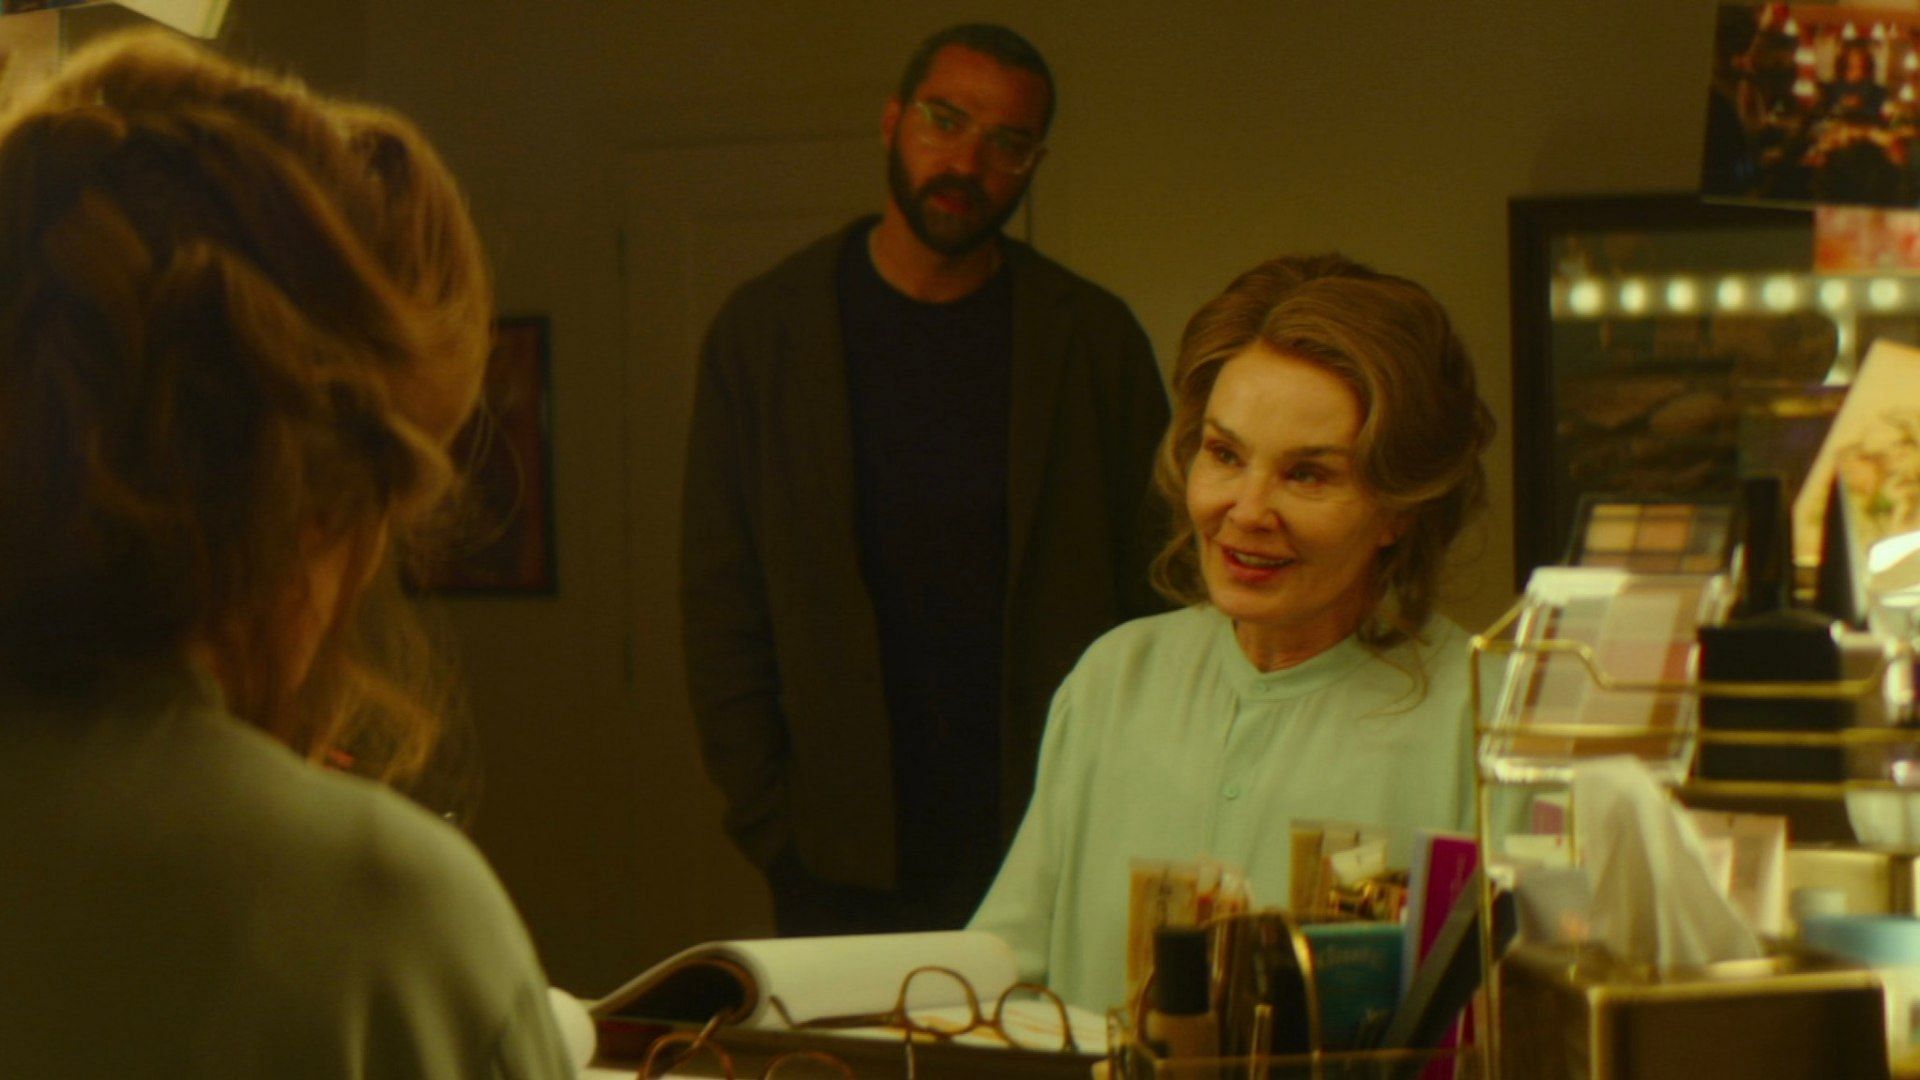 A still from the HBO drama The Great Lillian Hall starring Jessica Lange (Image via Facebook/HBO)